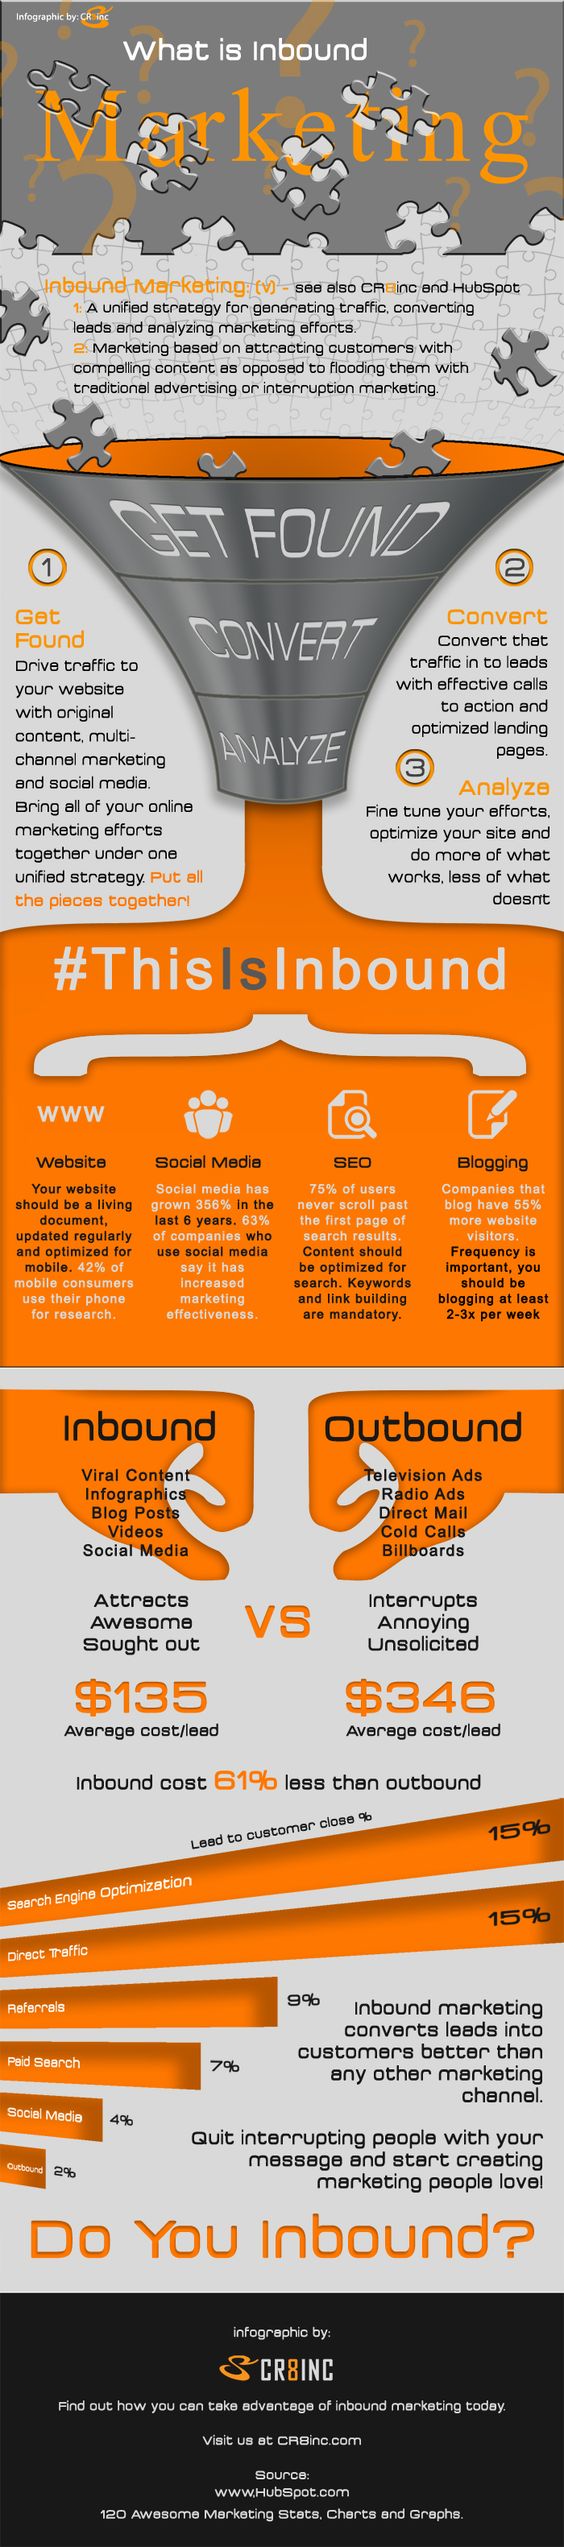 Infographic Of The Week: What Is Inbound Marketing